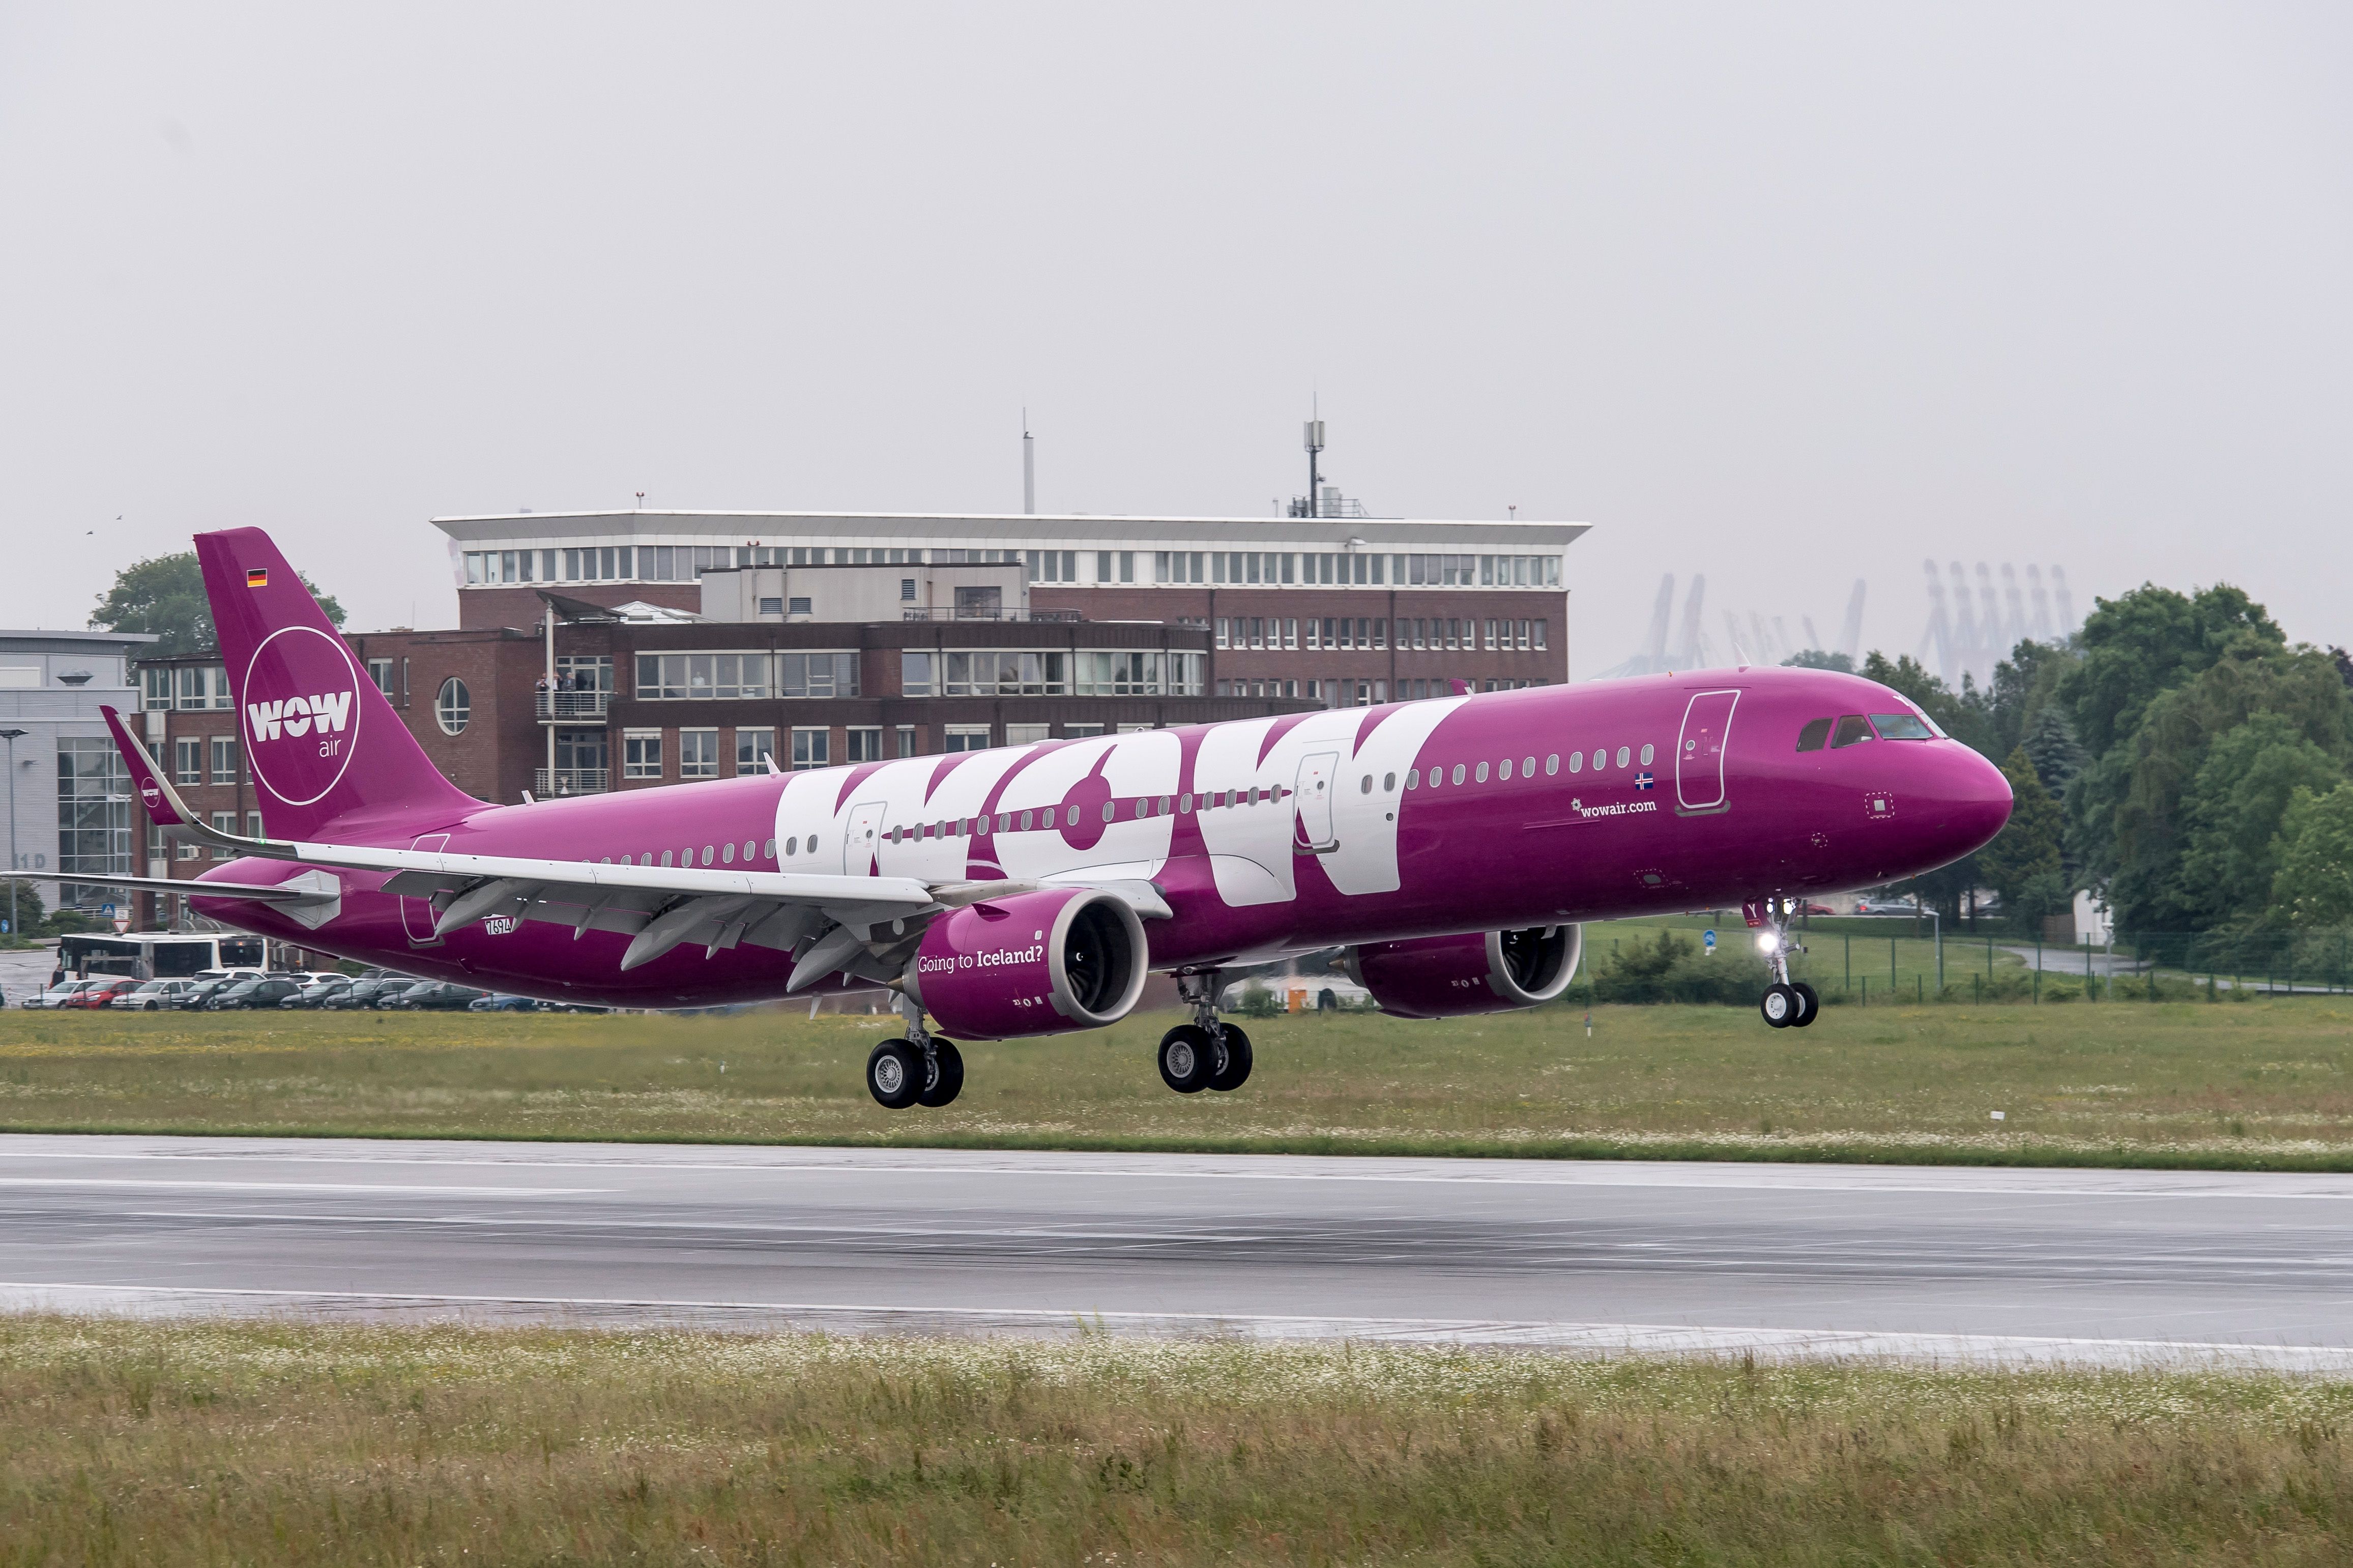 A WOW Air Airbus A321neo taking off.